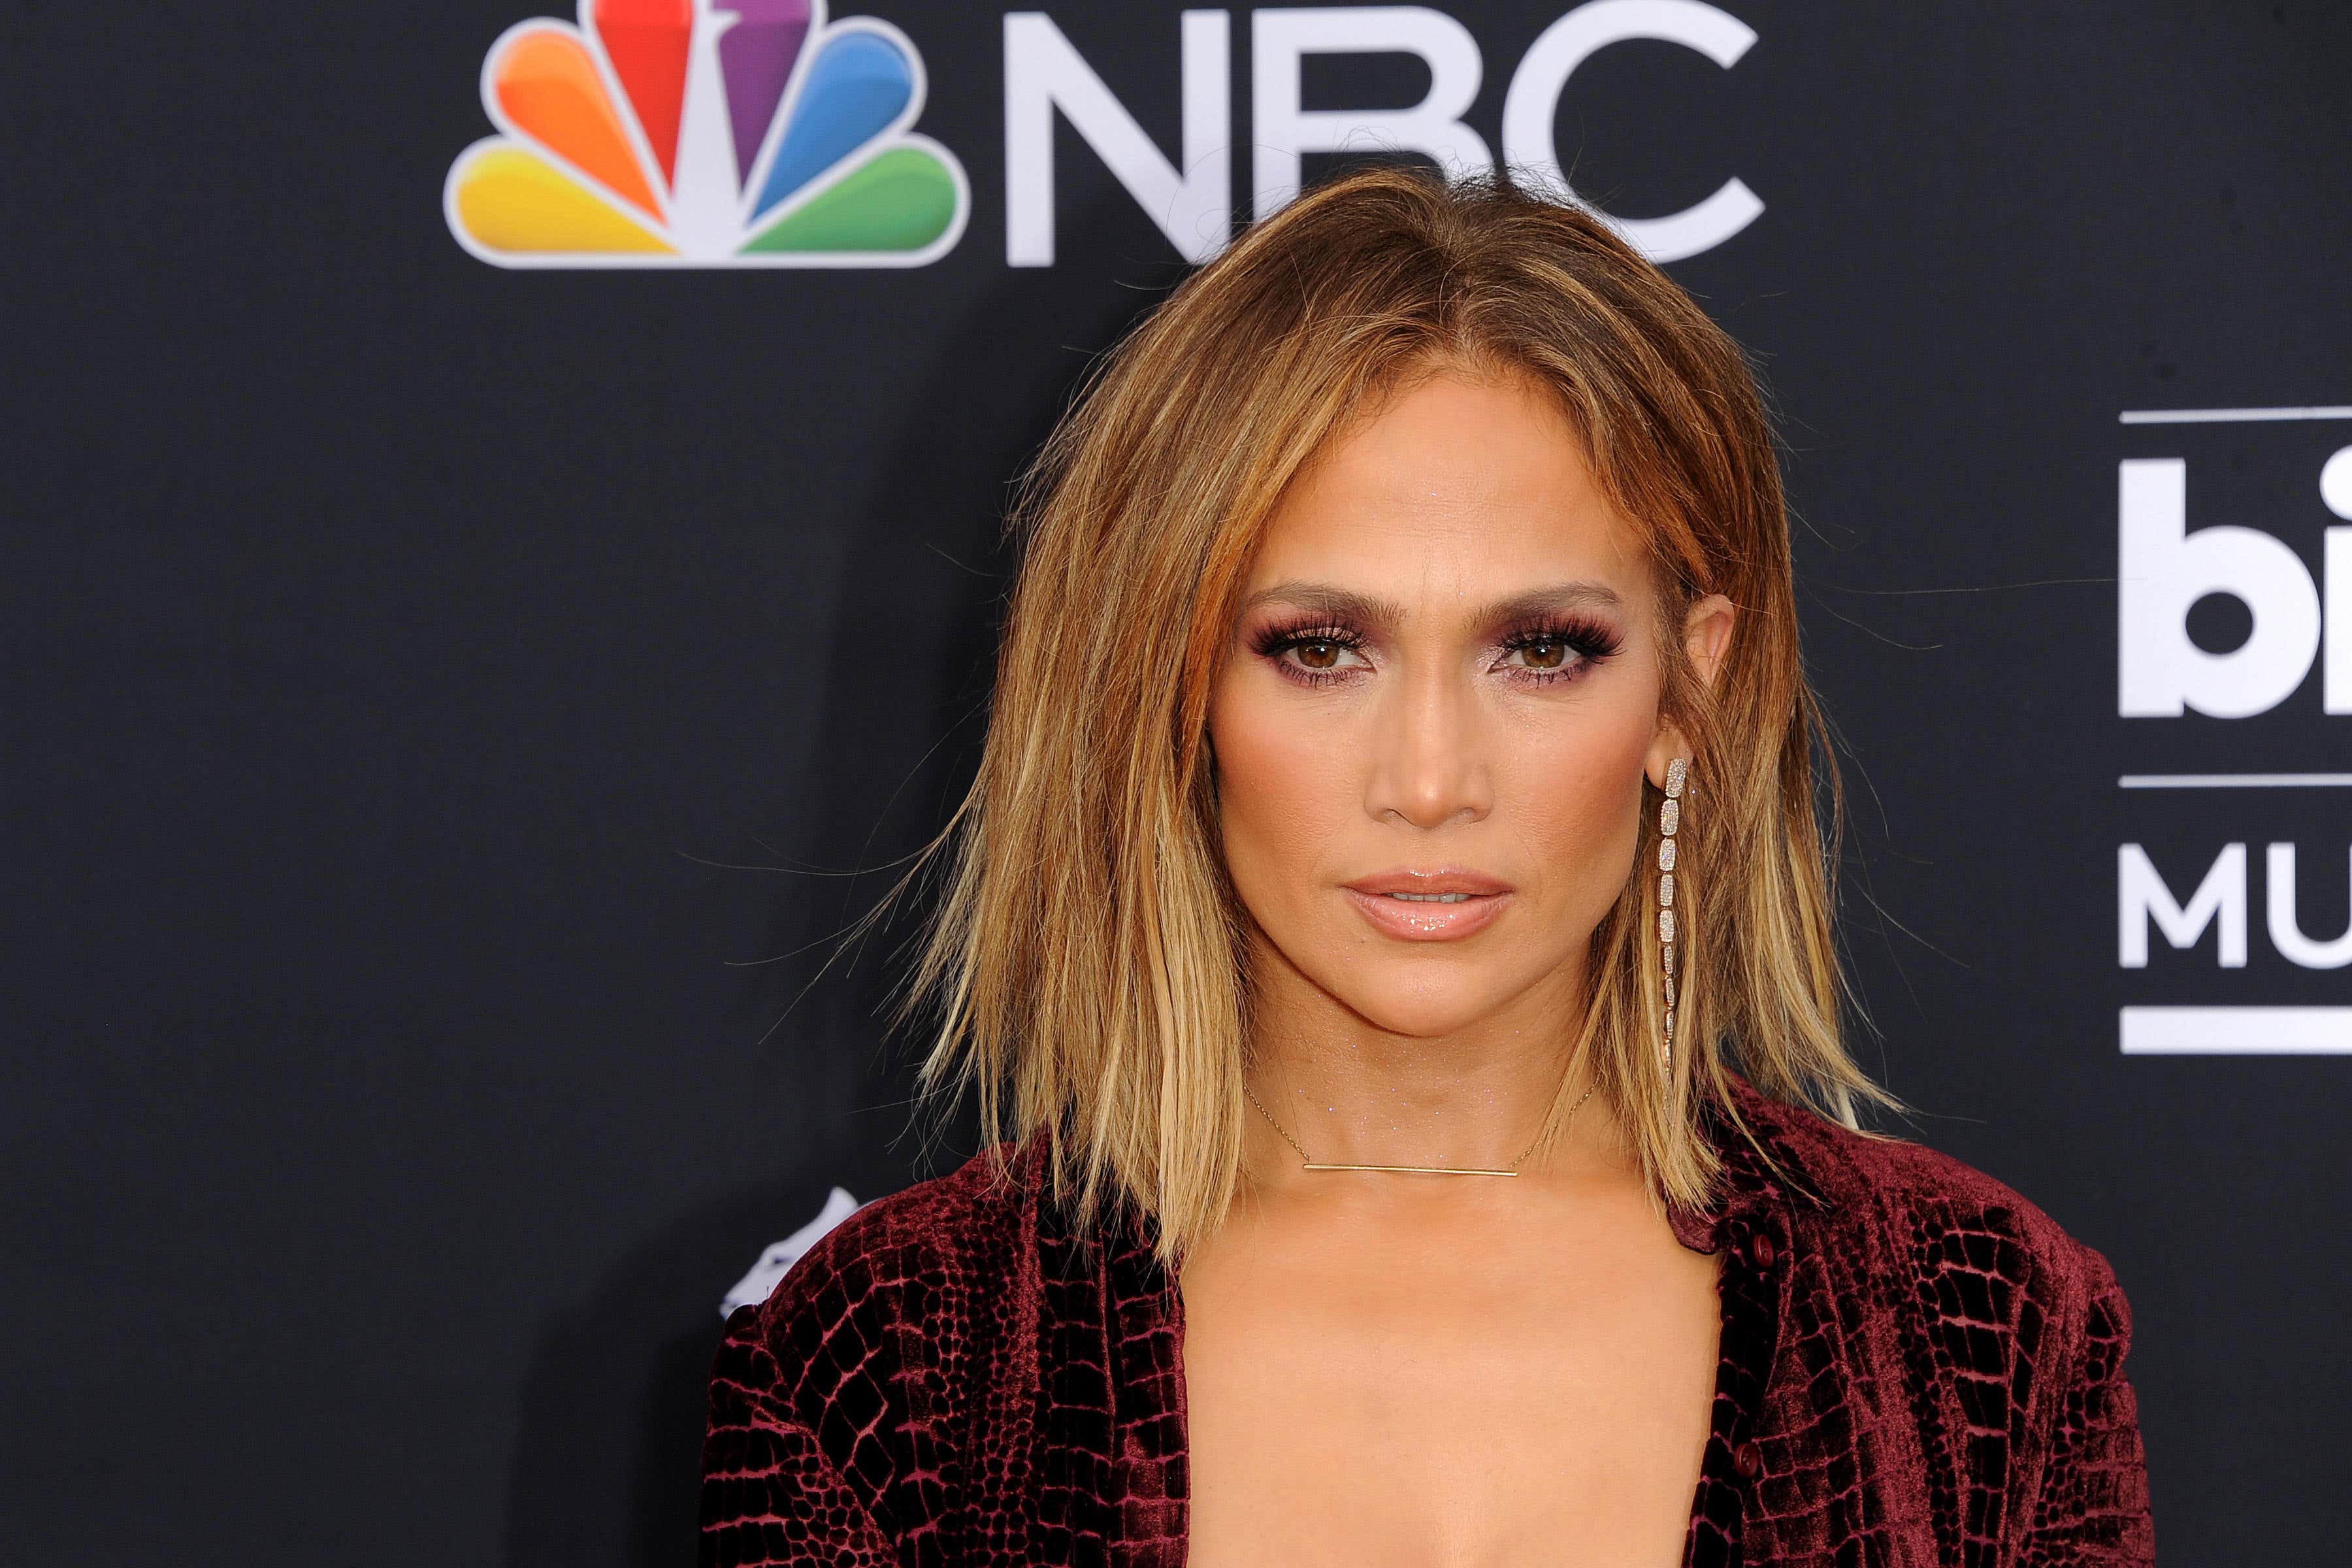 Jennifer Lopez's favorite styles are up to 75% off in the huge